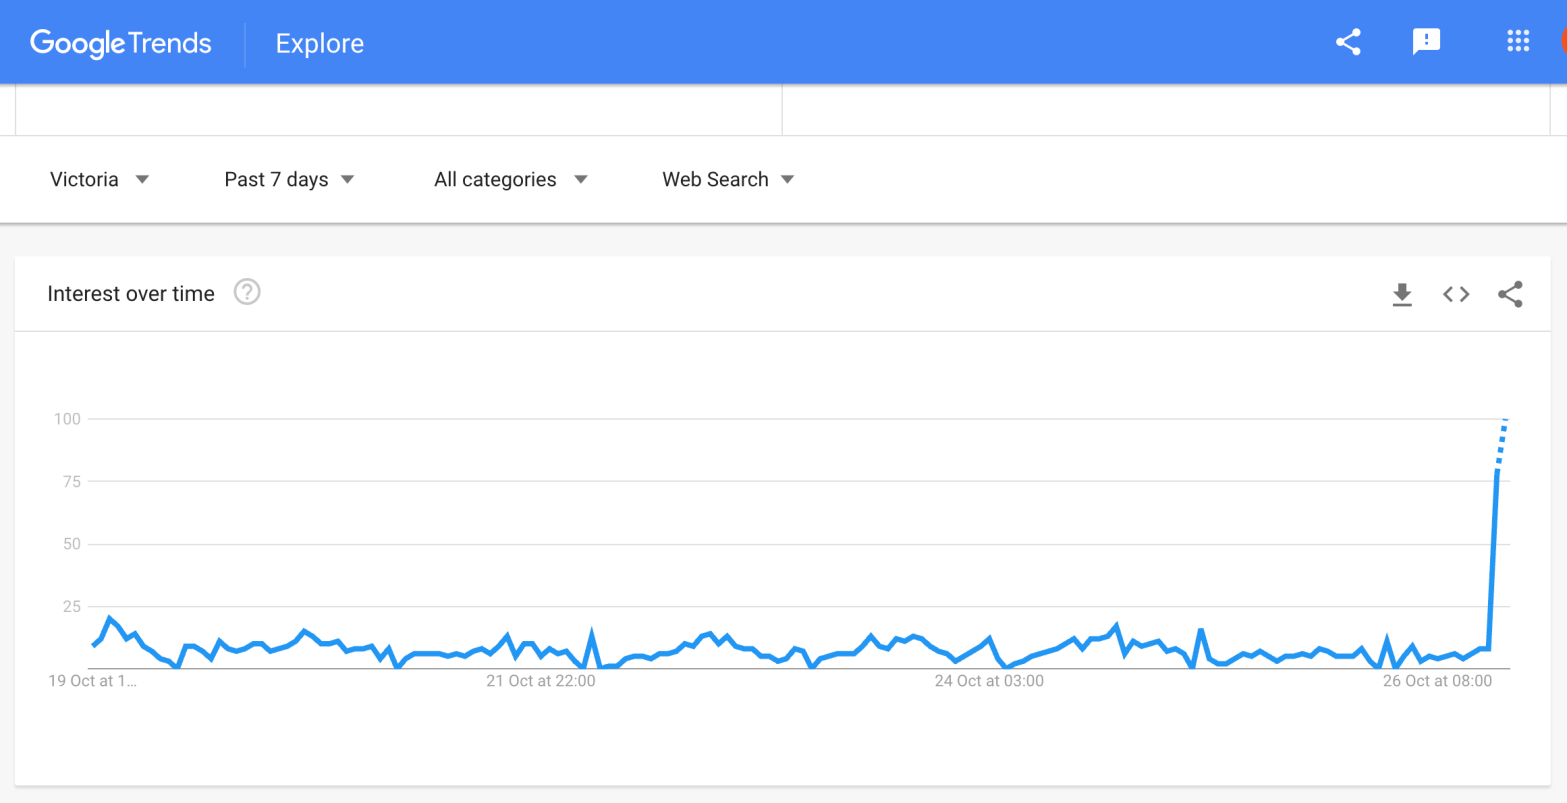 Google trends searches for beers in Victoria